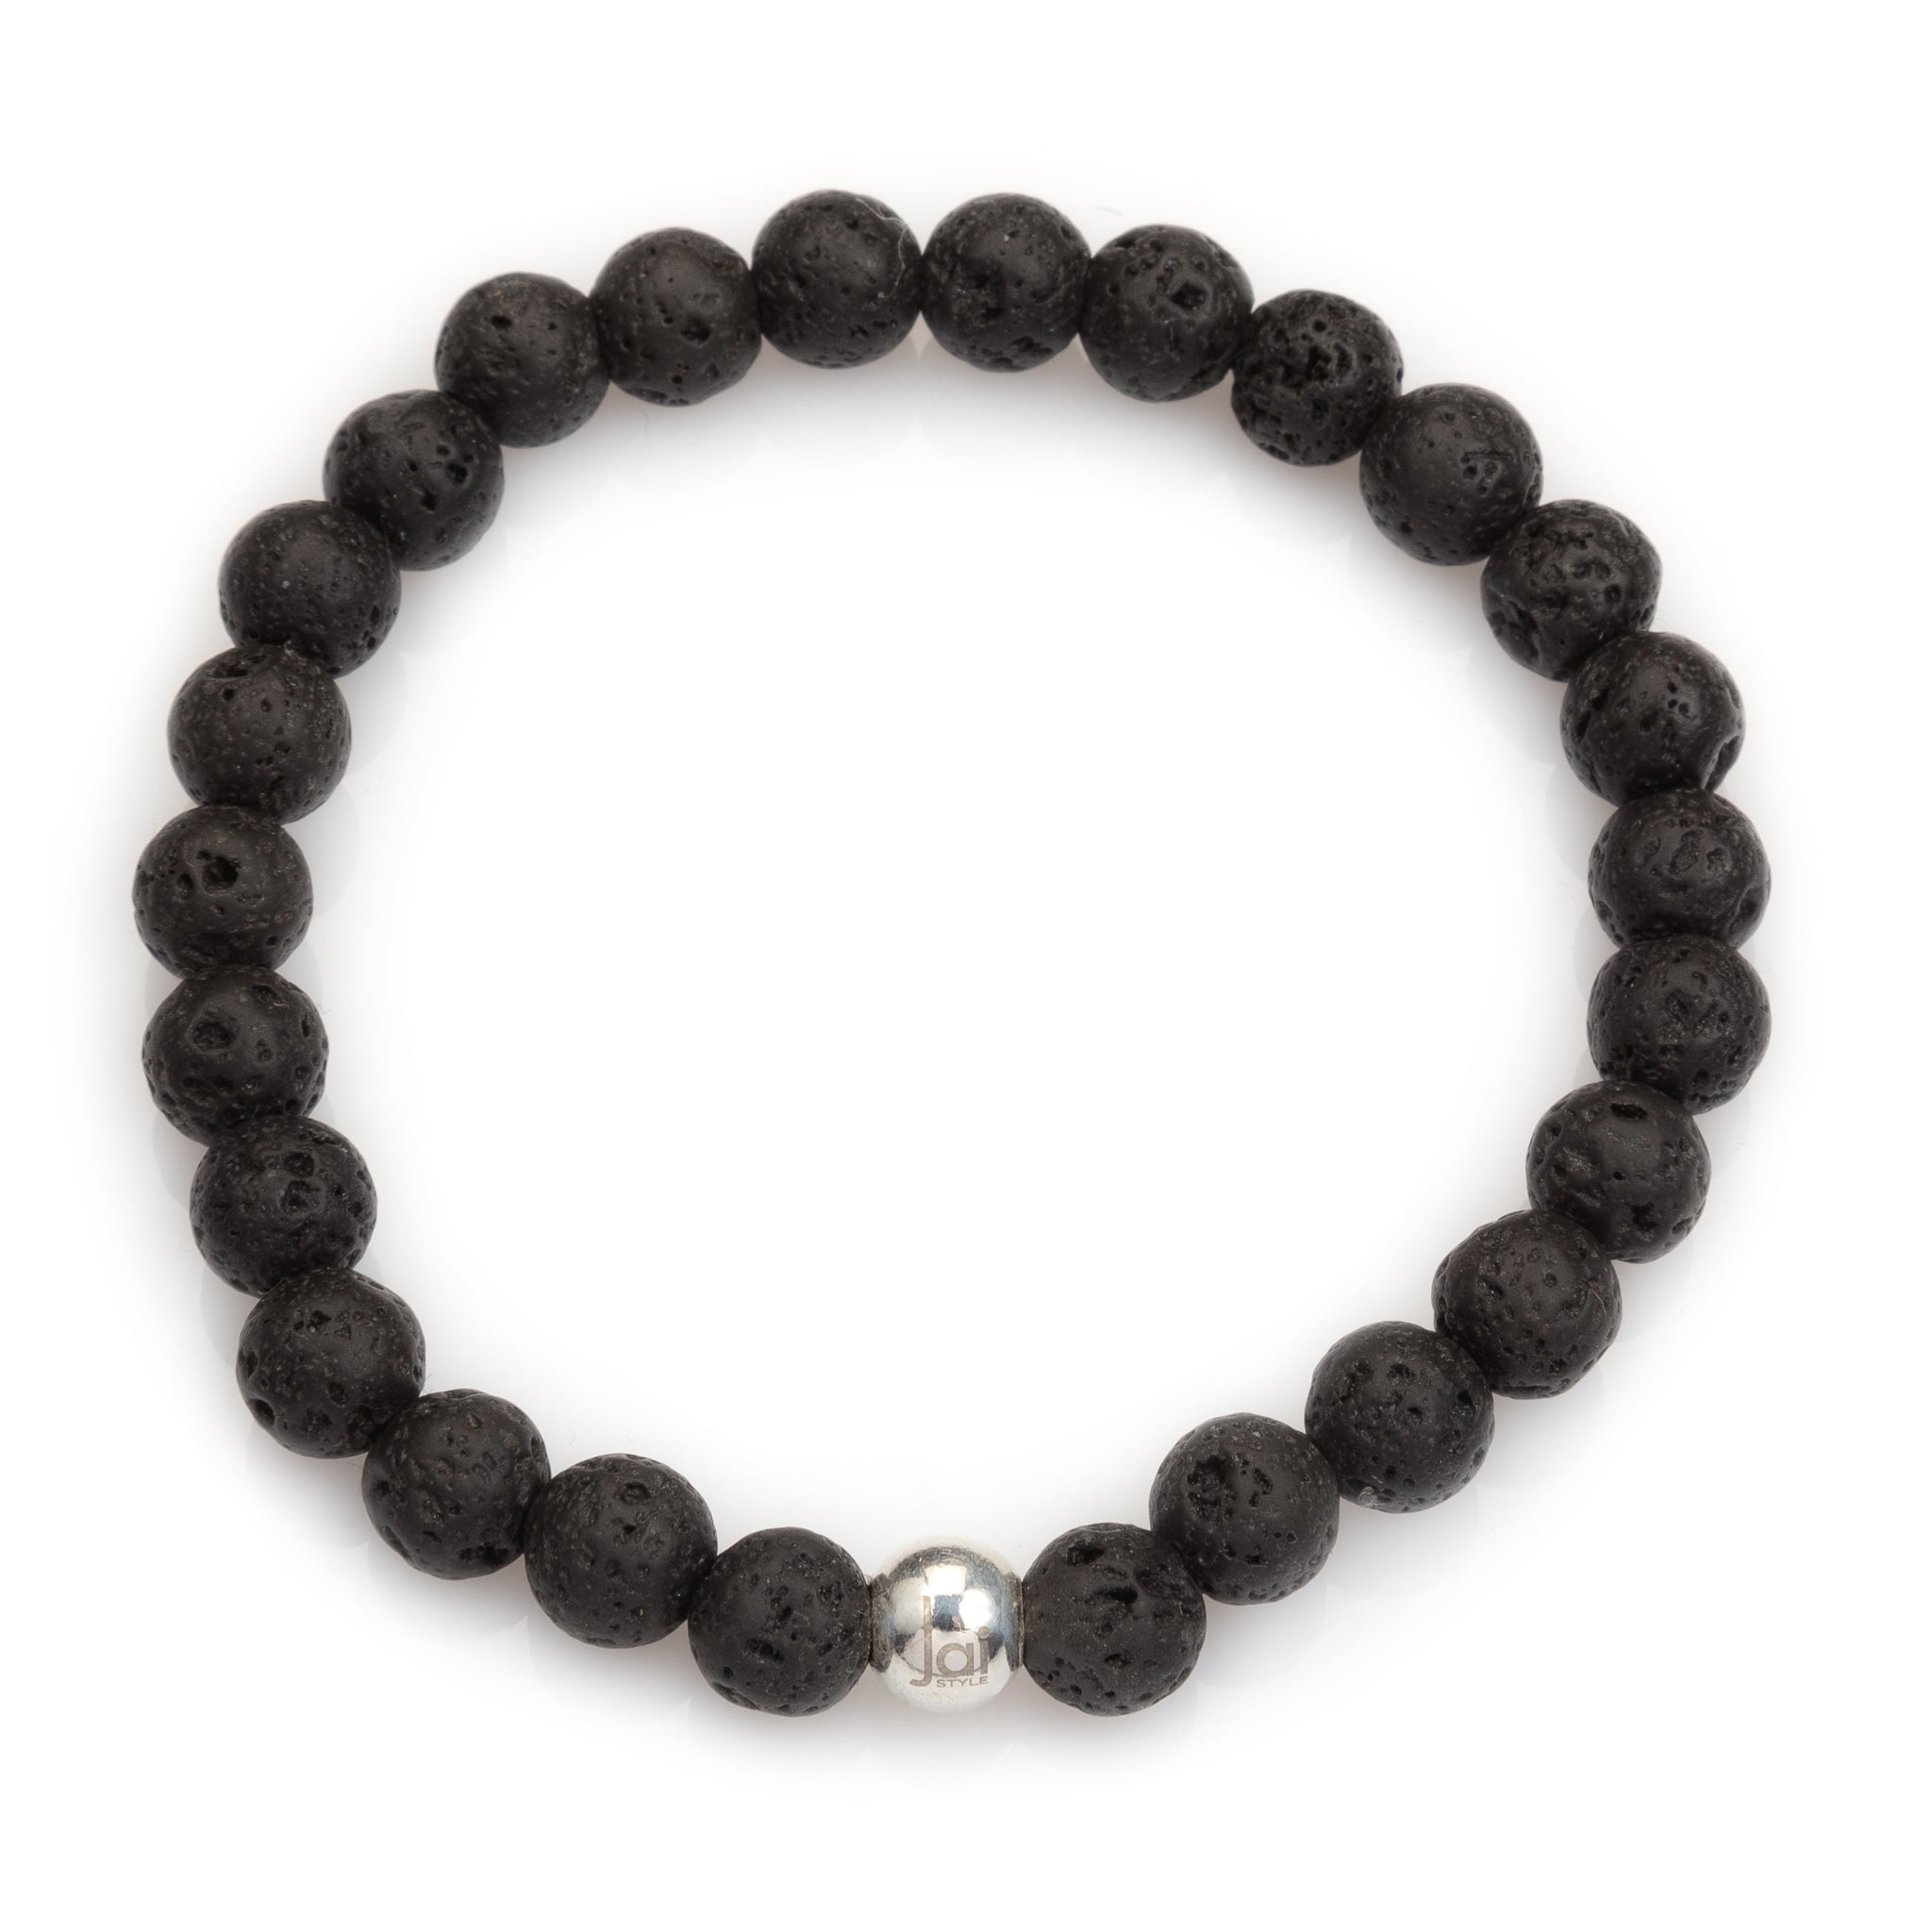 Black onyx stones bracelet for men and pure silver nuggets - JoyElly